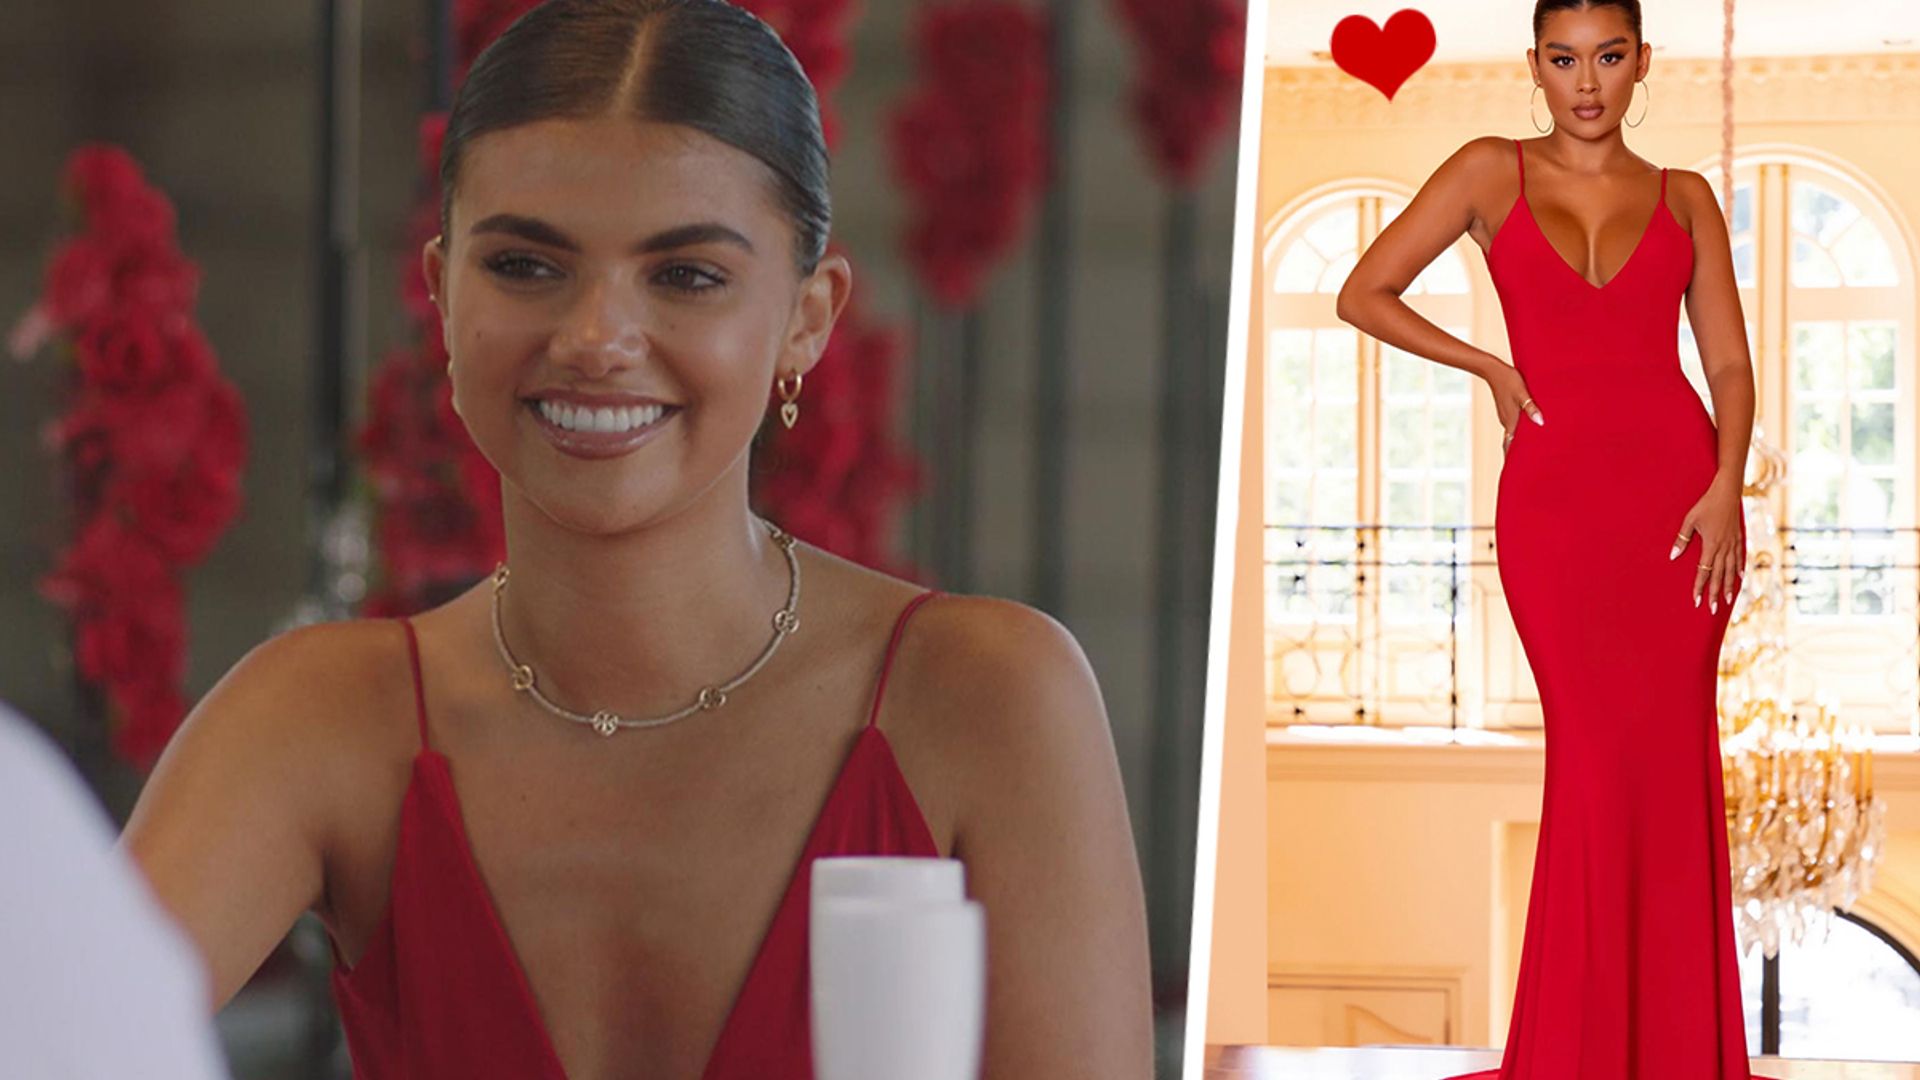 Love Island's Samie Elishi sends ITV viewers wild in her backless red dress  - and wow